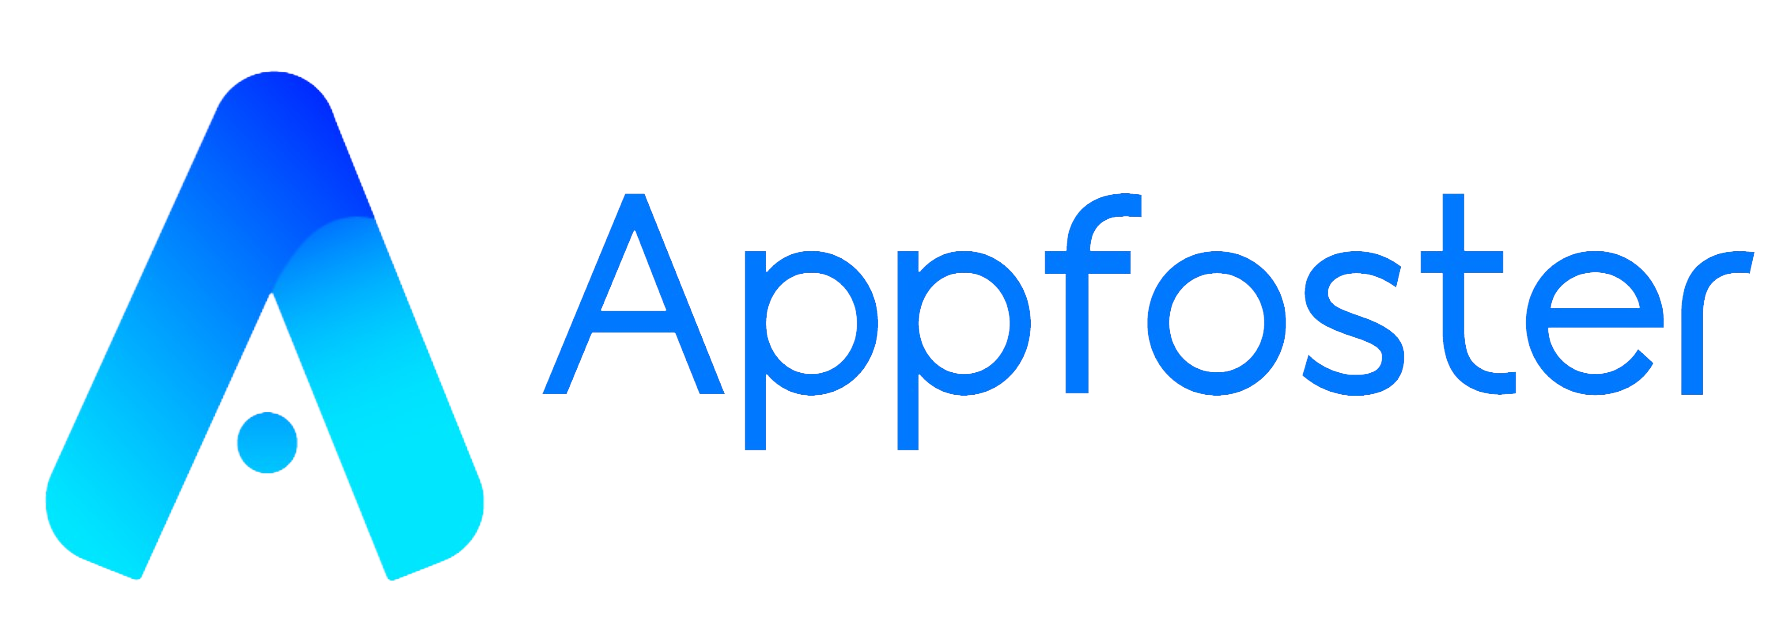 Appfoster | We develop your Apps right